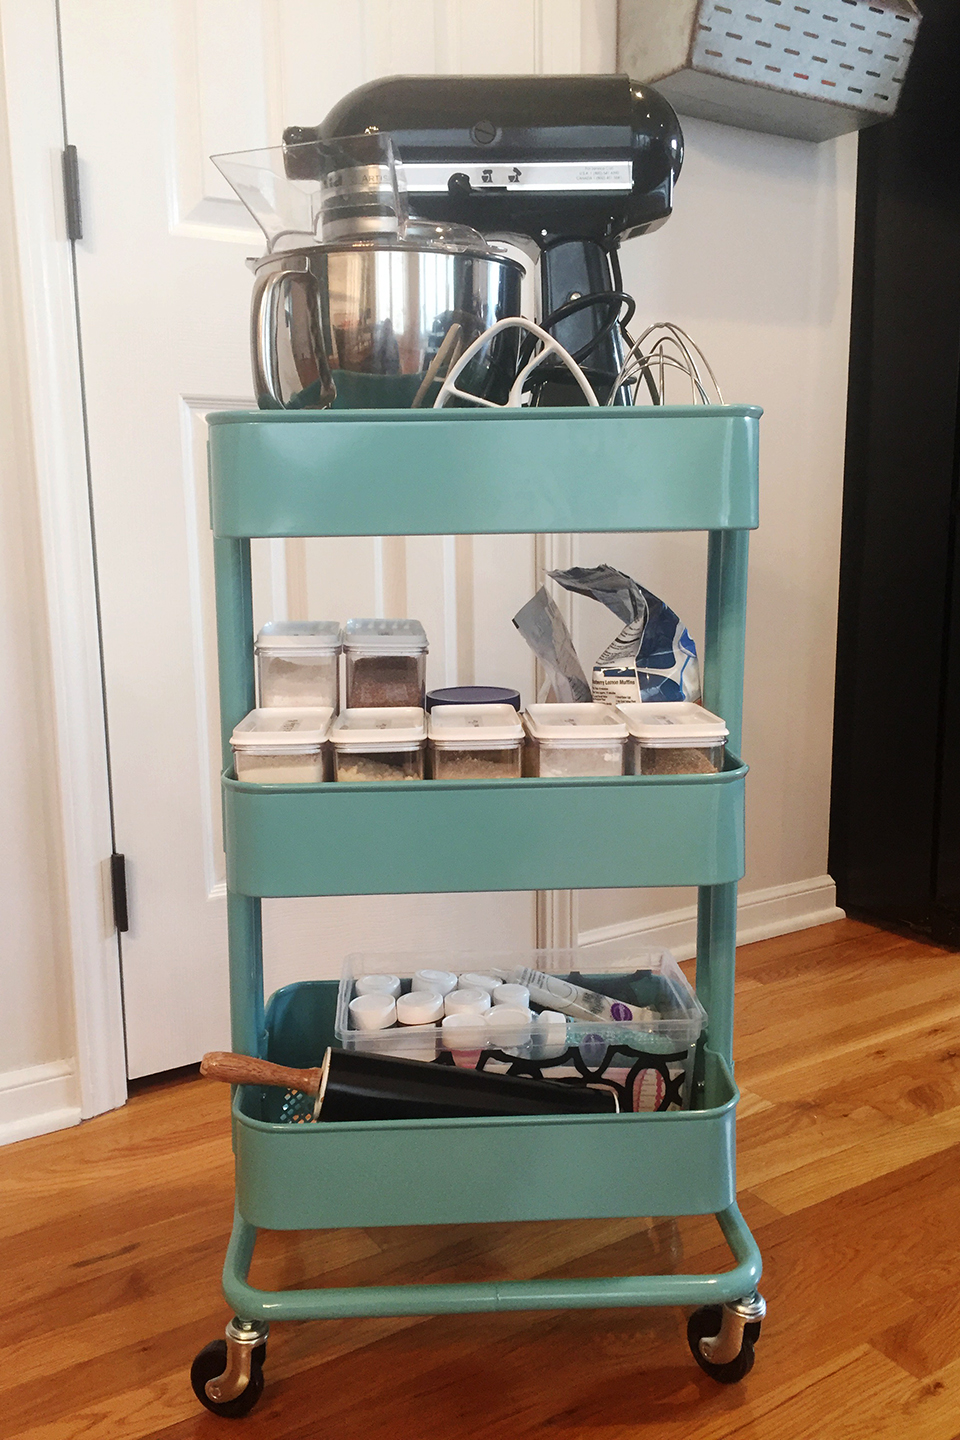 Blue rolling cart with stand mixer and other baking items